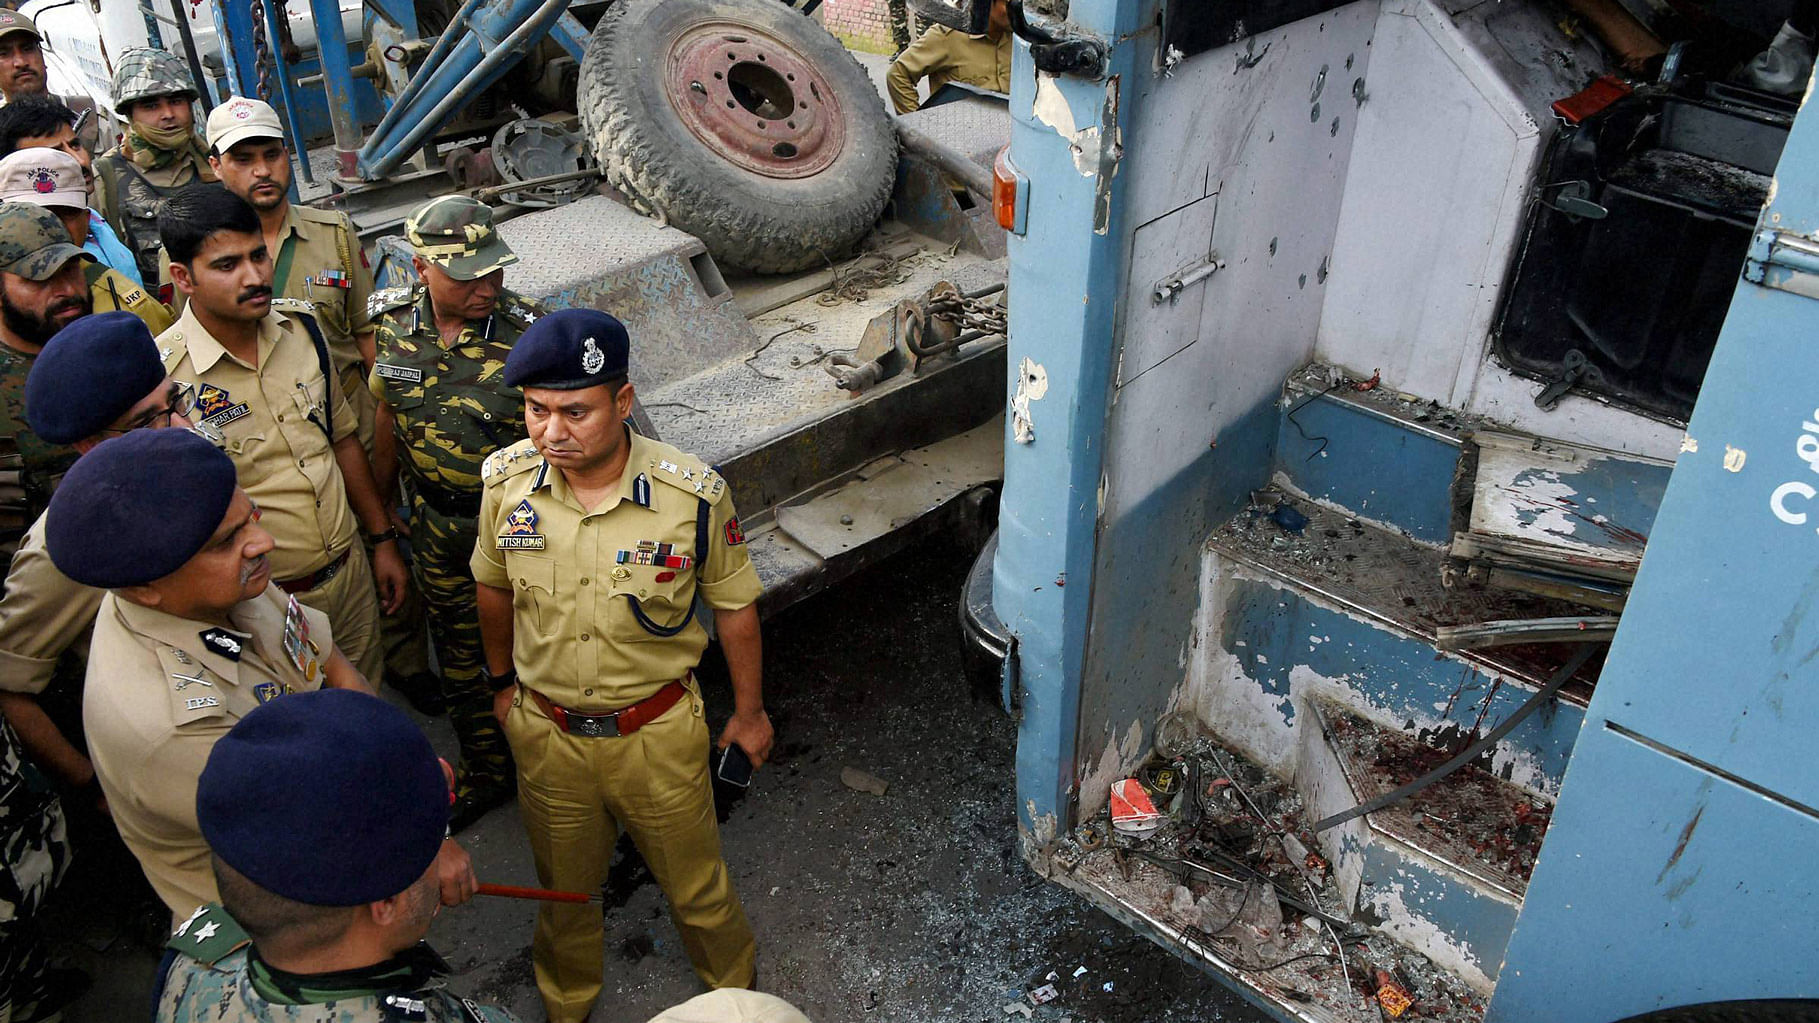 

Security forces inspecting the CRPF bus attacked by militants on the Srinagar-Jammu National Highway at Pampore in Srinagar, 25 June  2016. (Photo: PTI)